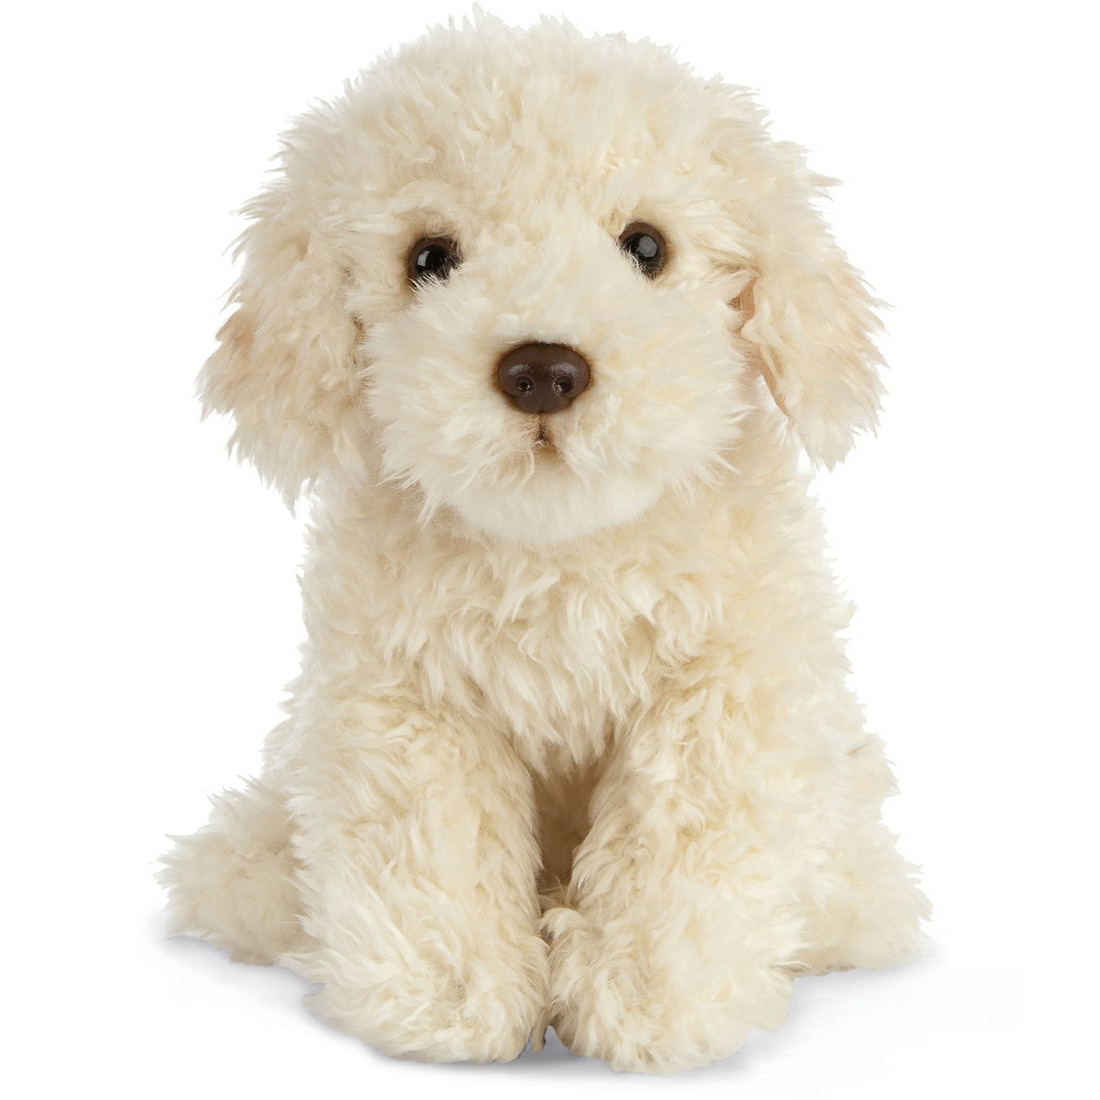 Living Nature Pluche beige Labradoodle hond knuffel 25 cm speelgoed -